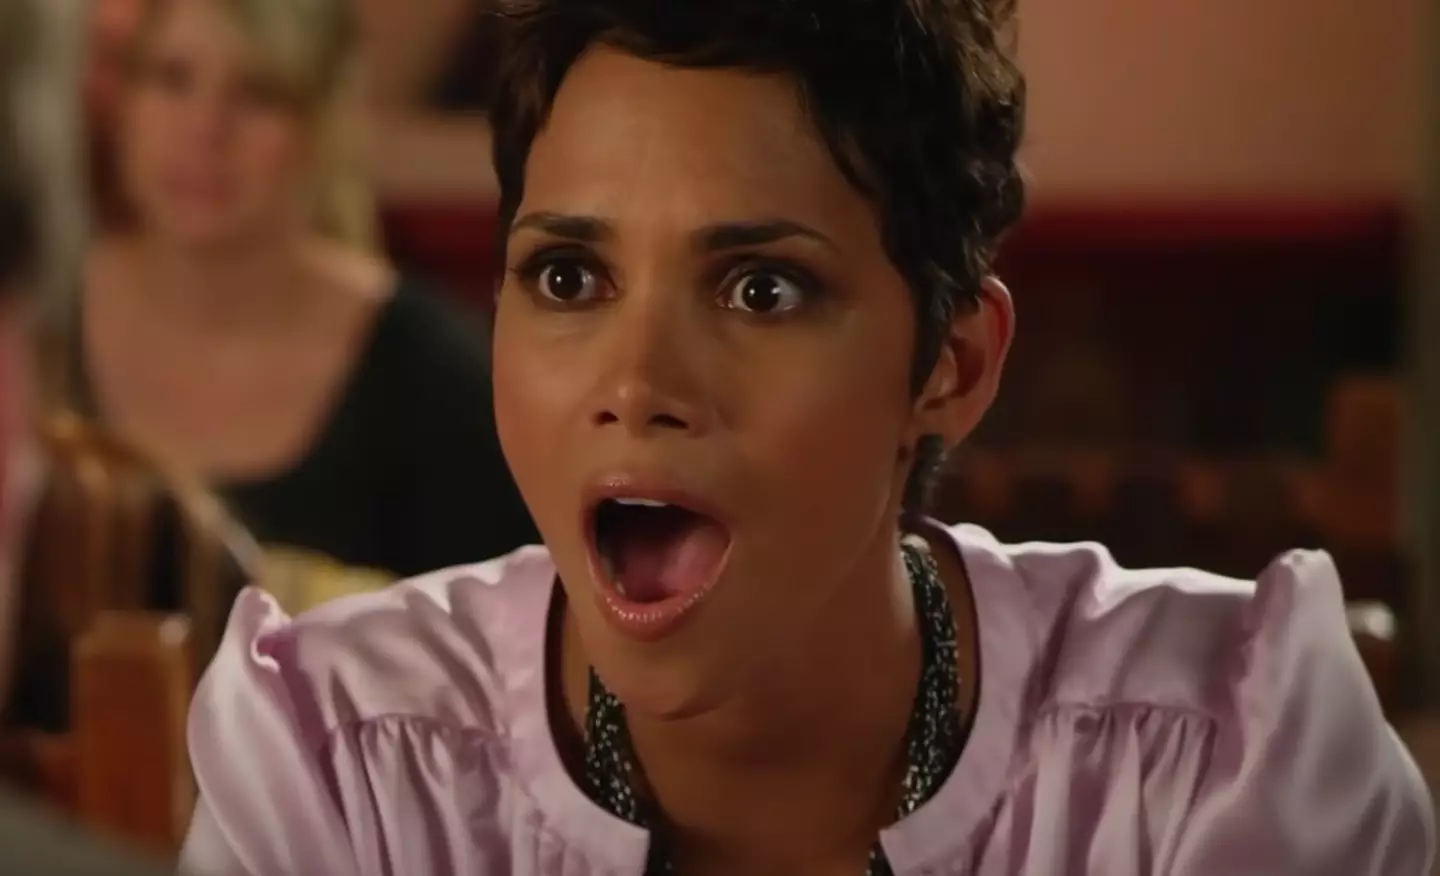 Halle Berry stars in the hit comedy film.